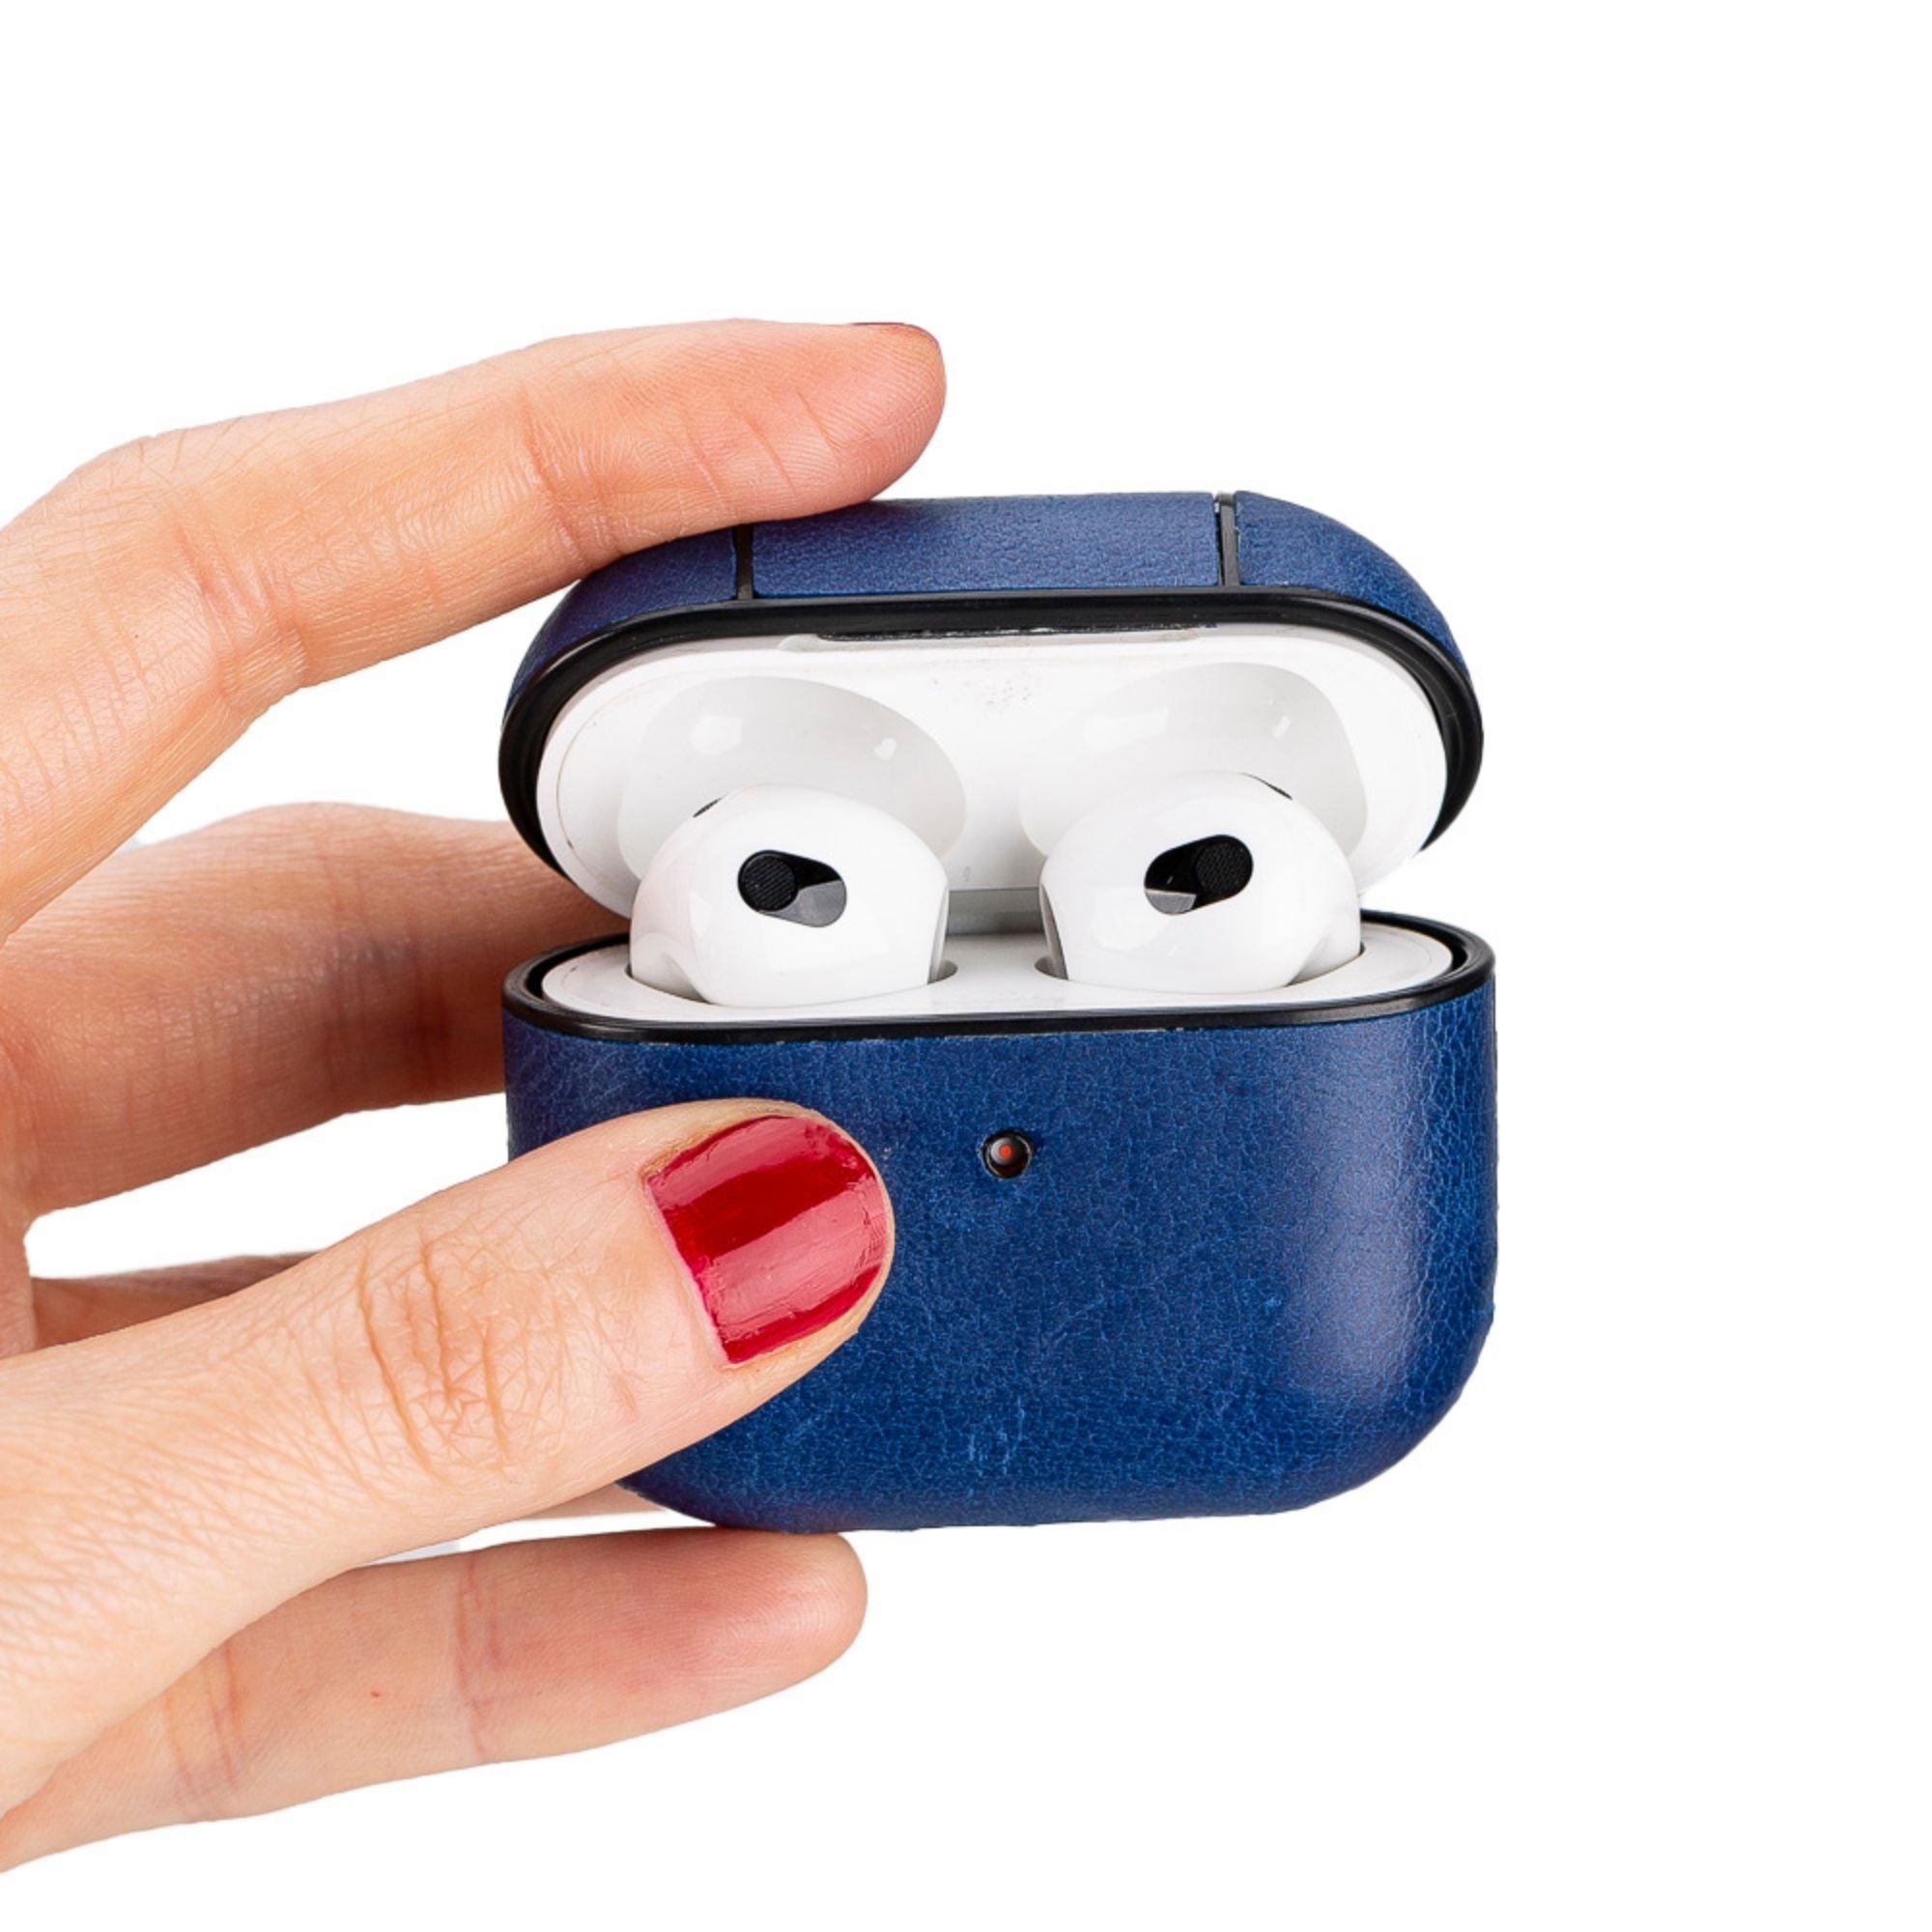 Leather AirPods 3 Case, Blue